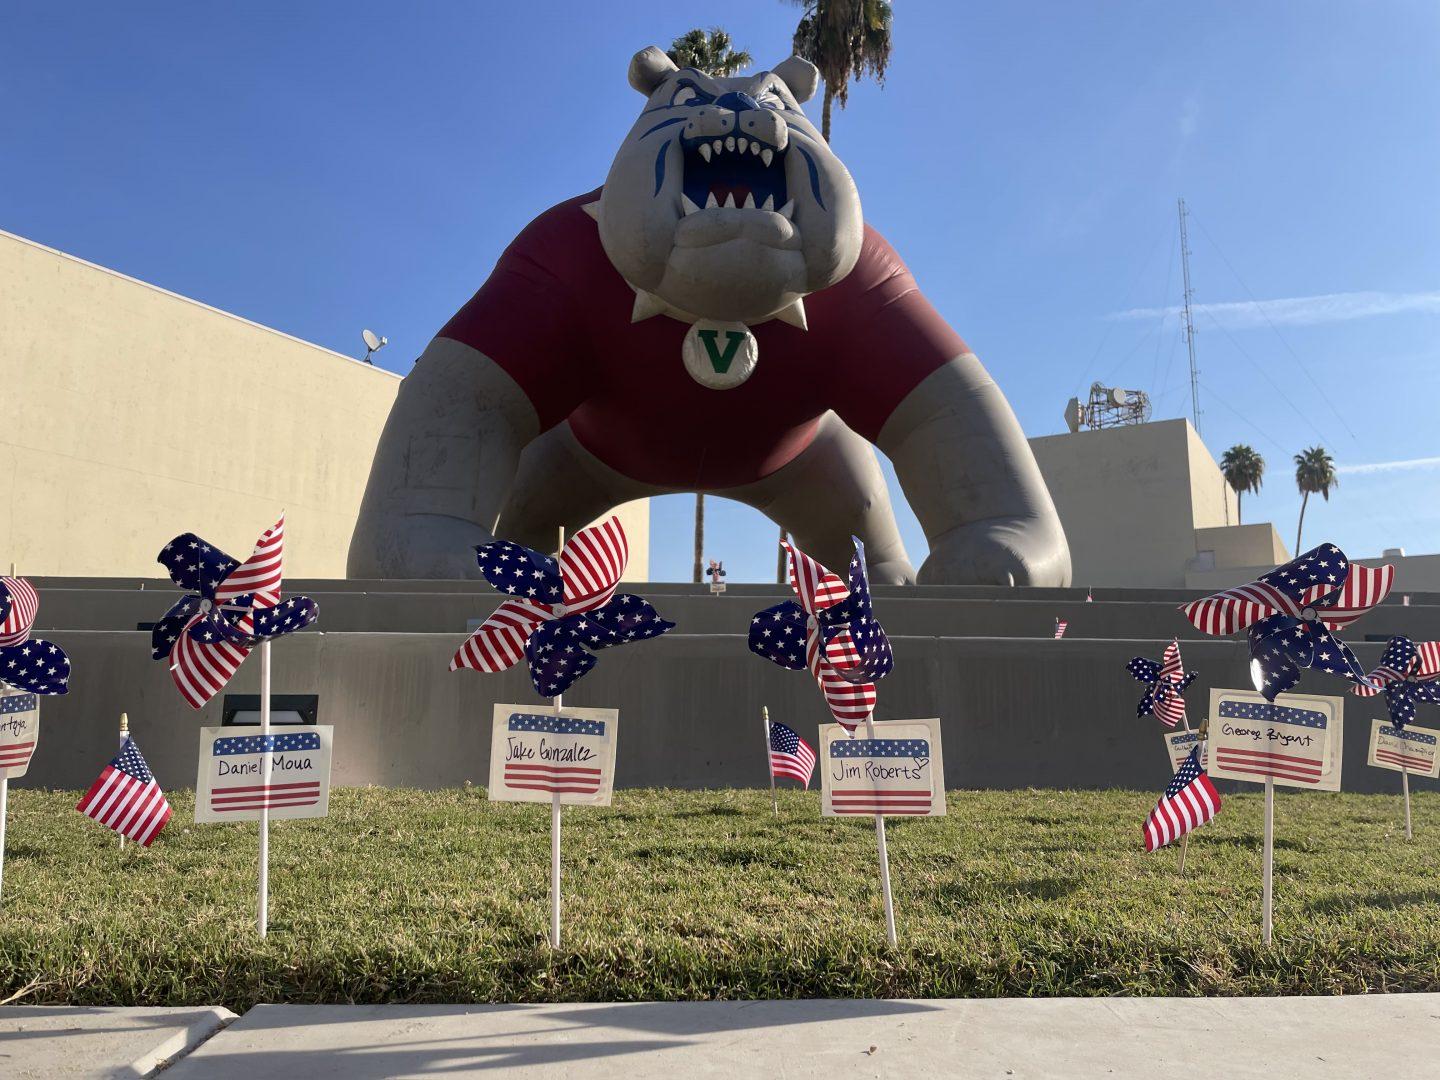 The Veterans Resource Center hosted the Red Friday event, highlighting upcoming events, including the Central Valley Veterans Day Parade on Nov. 11. (Ashley Flowers/The Collegian)